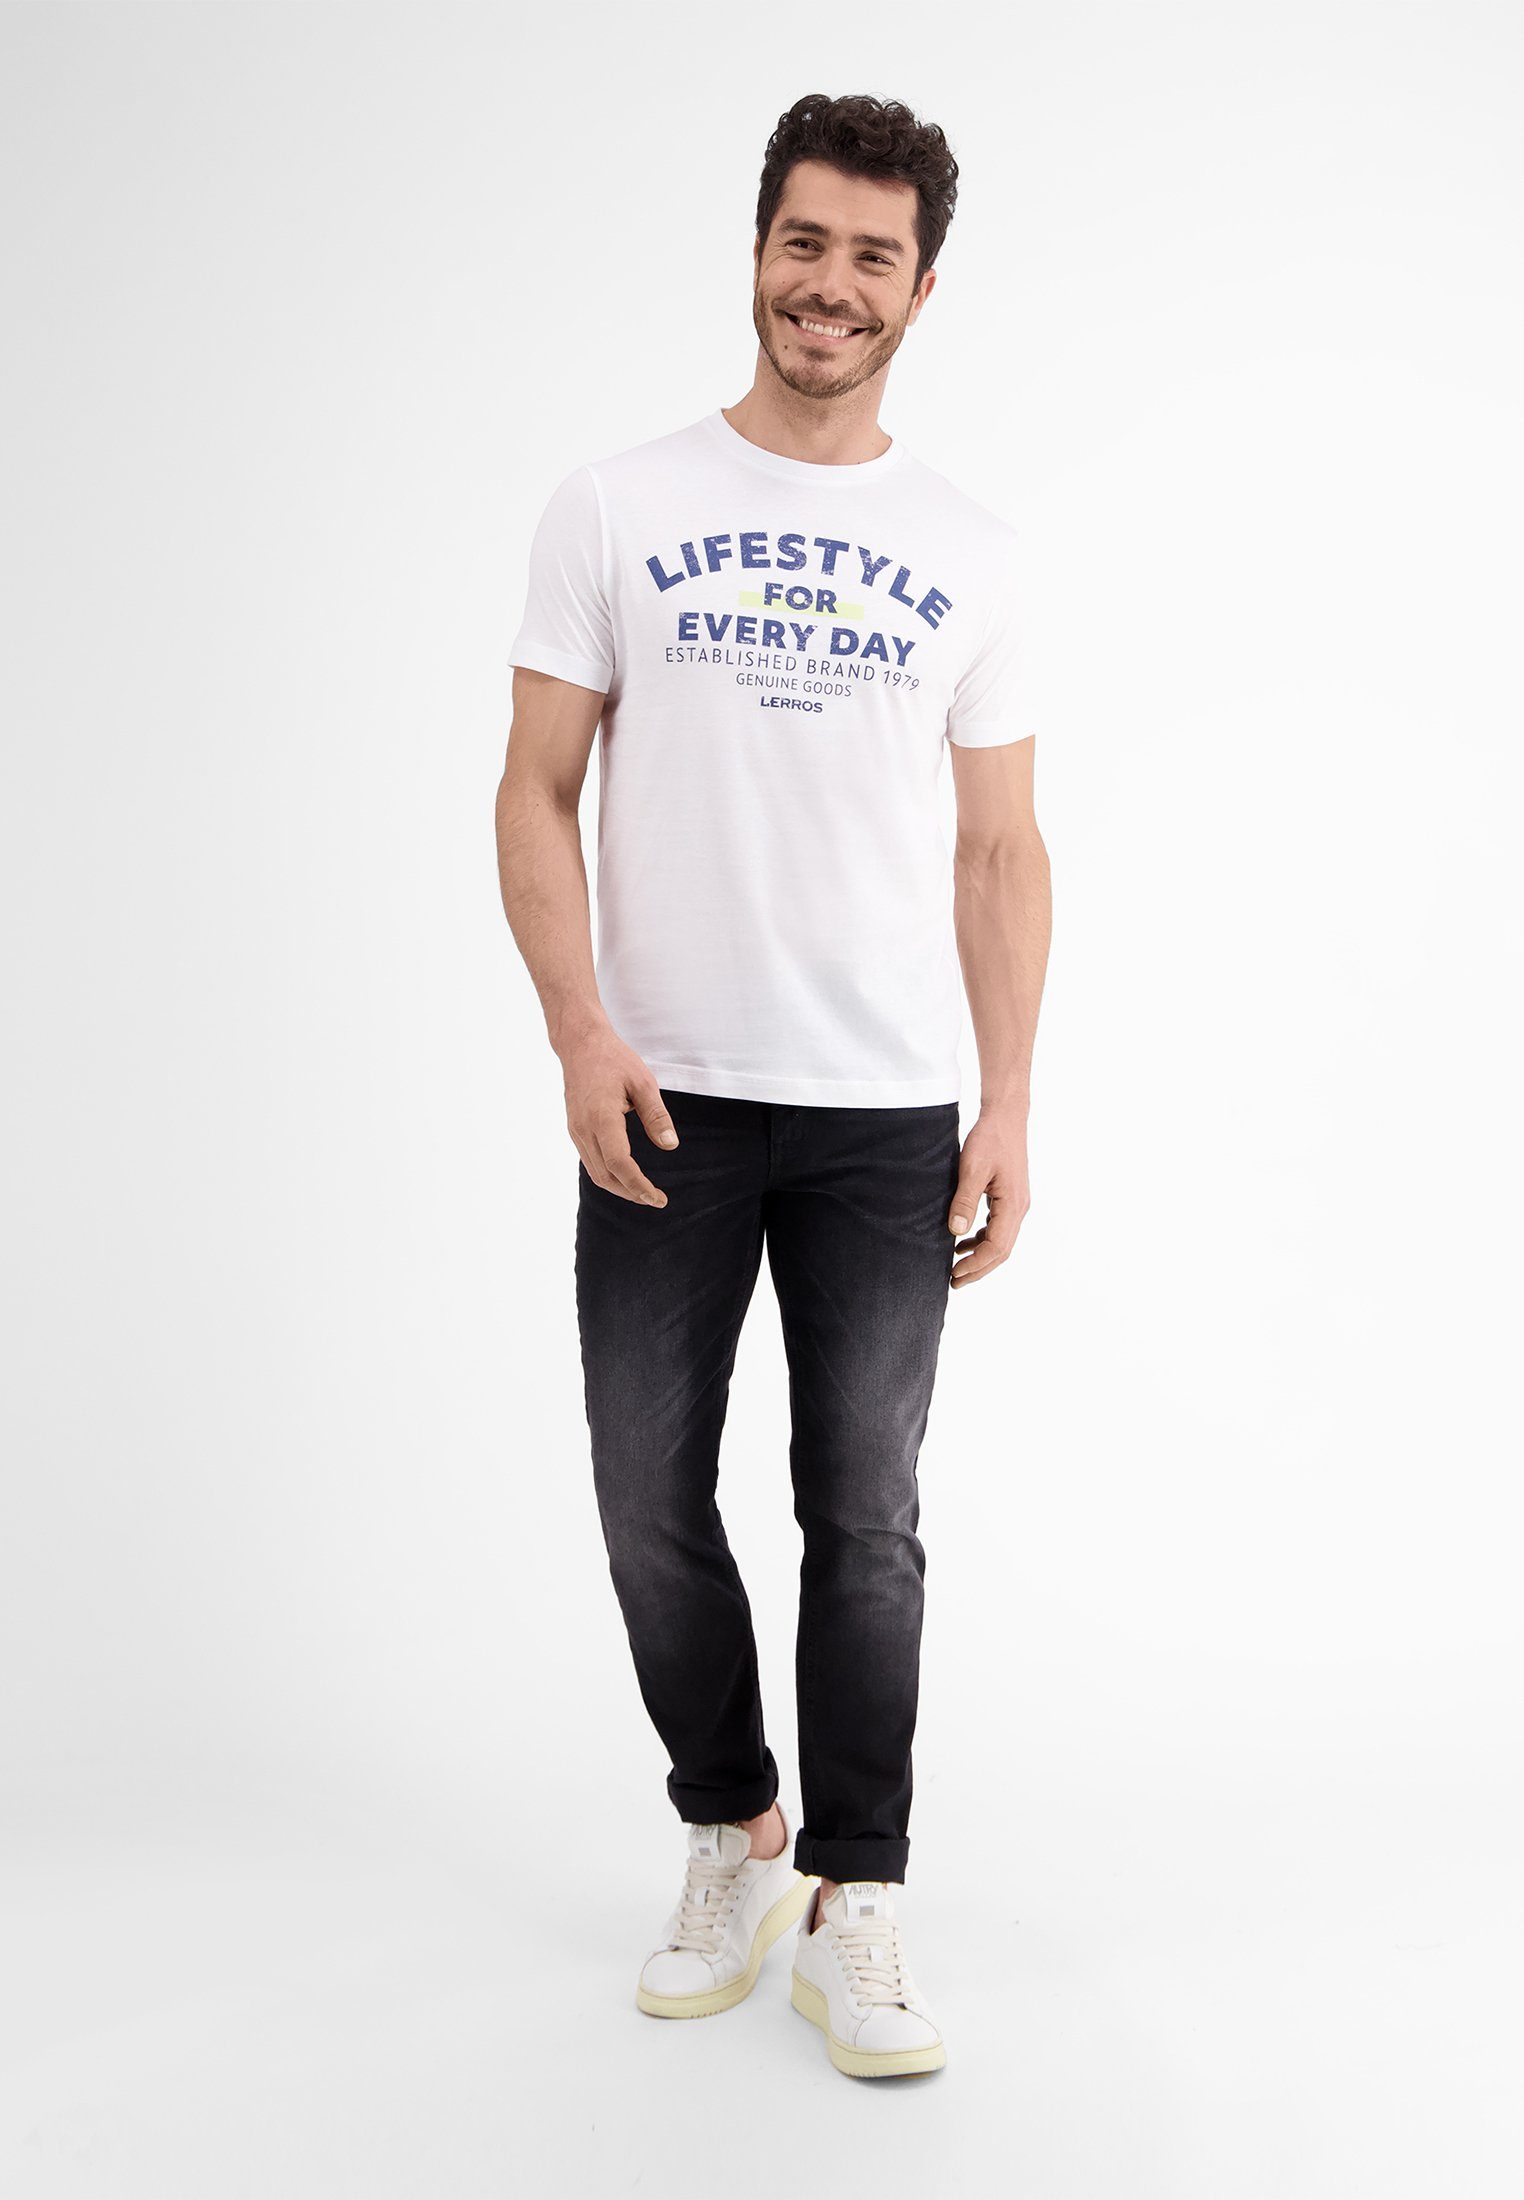 LERROS T-Shirt for day* WHITE *Lifestyle every LERROS T-Shirt